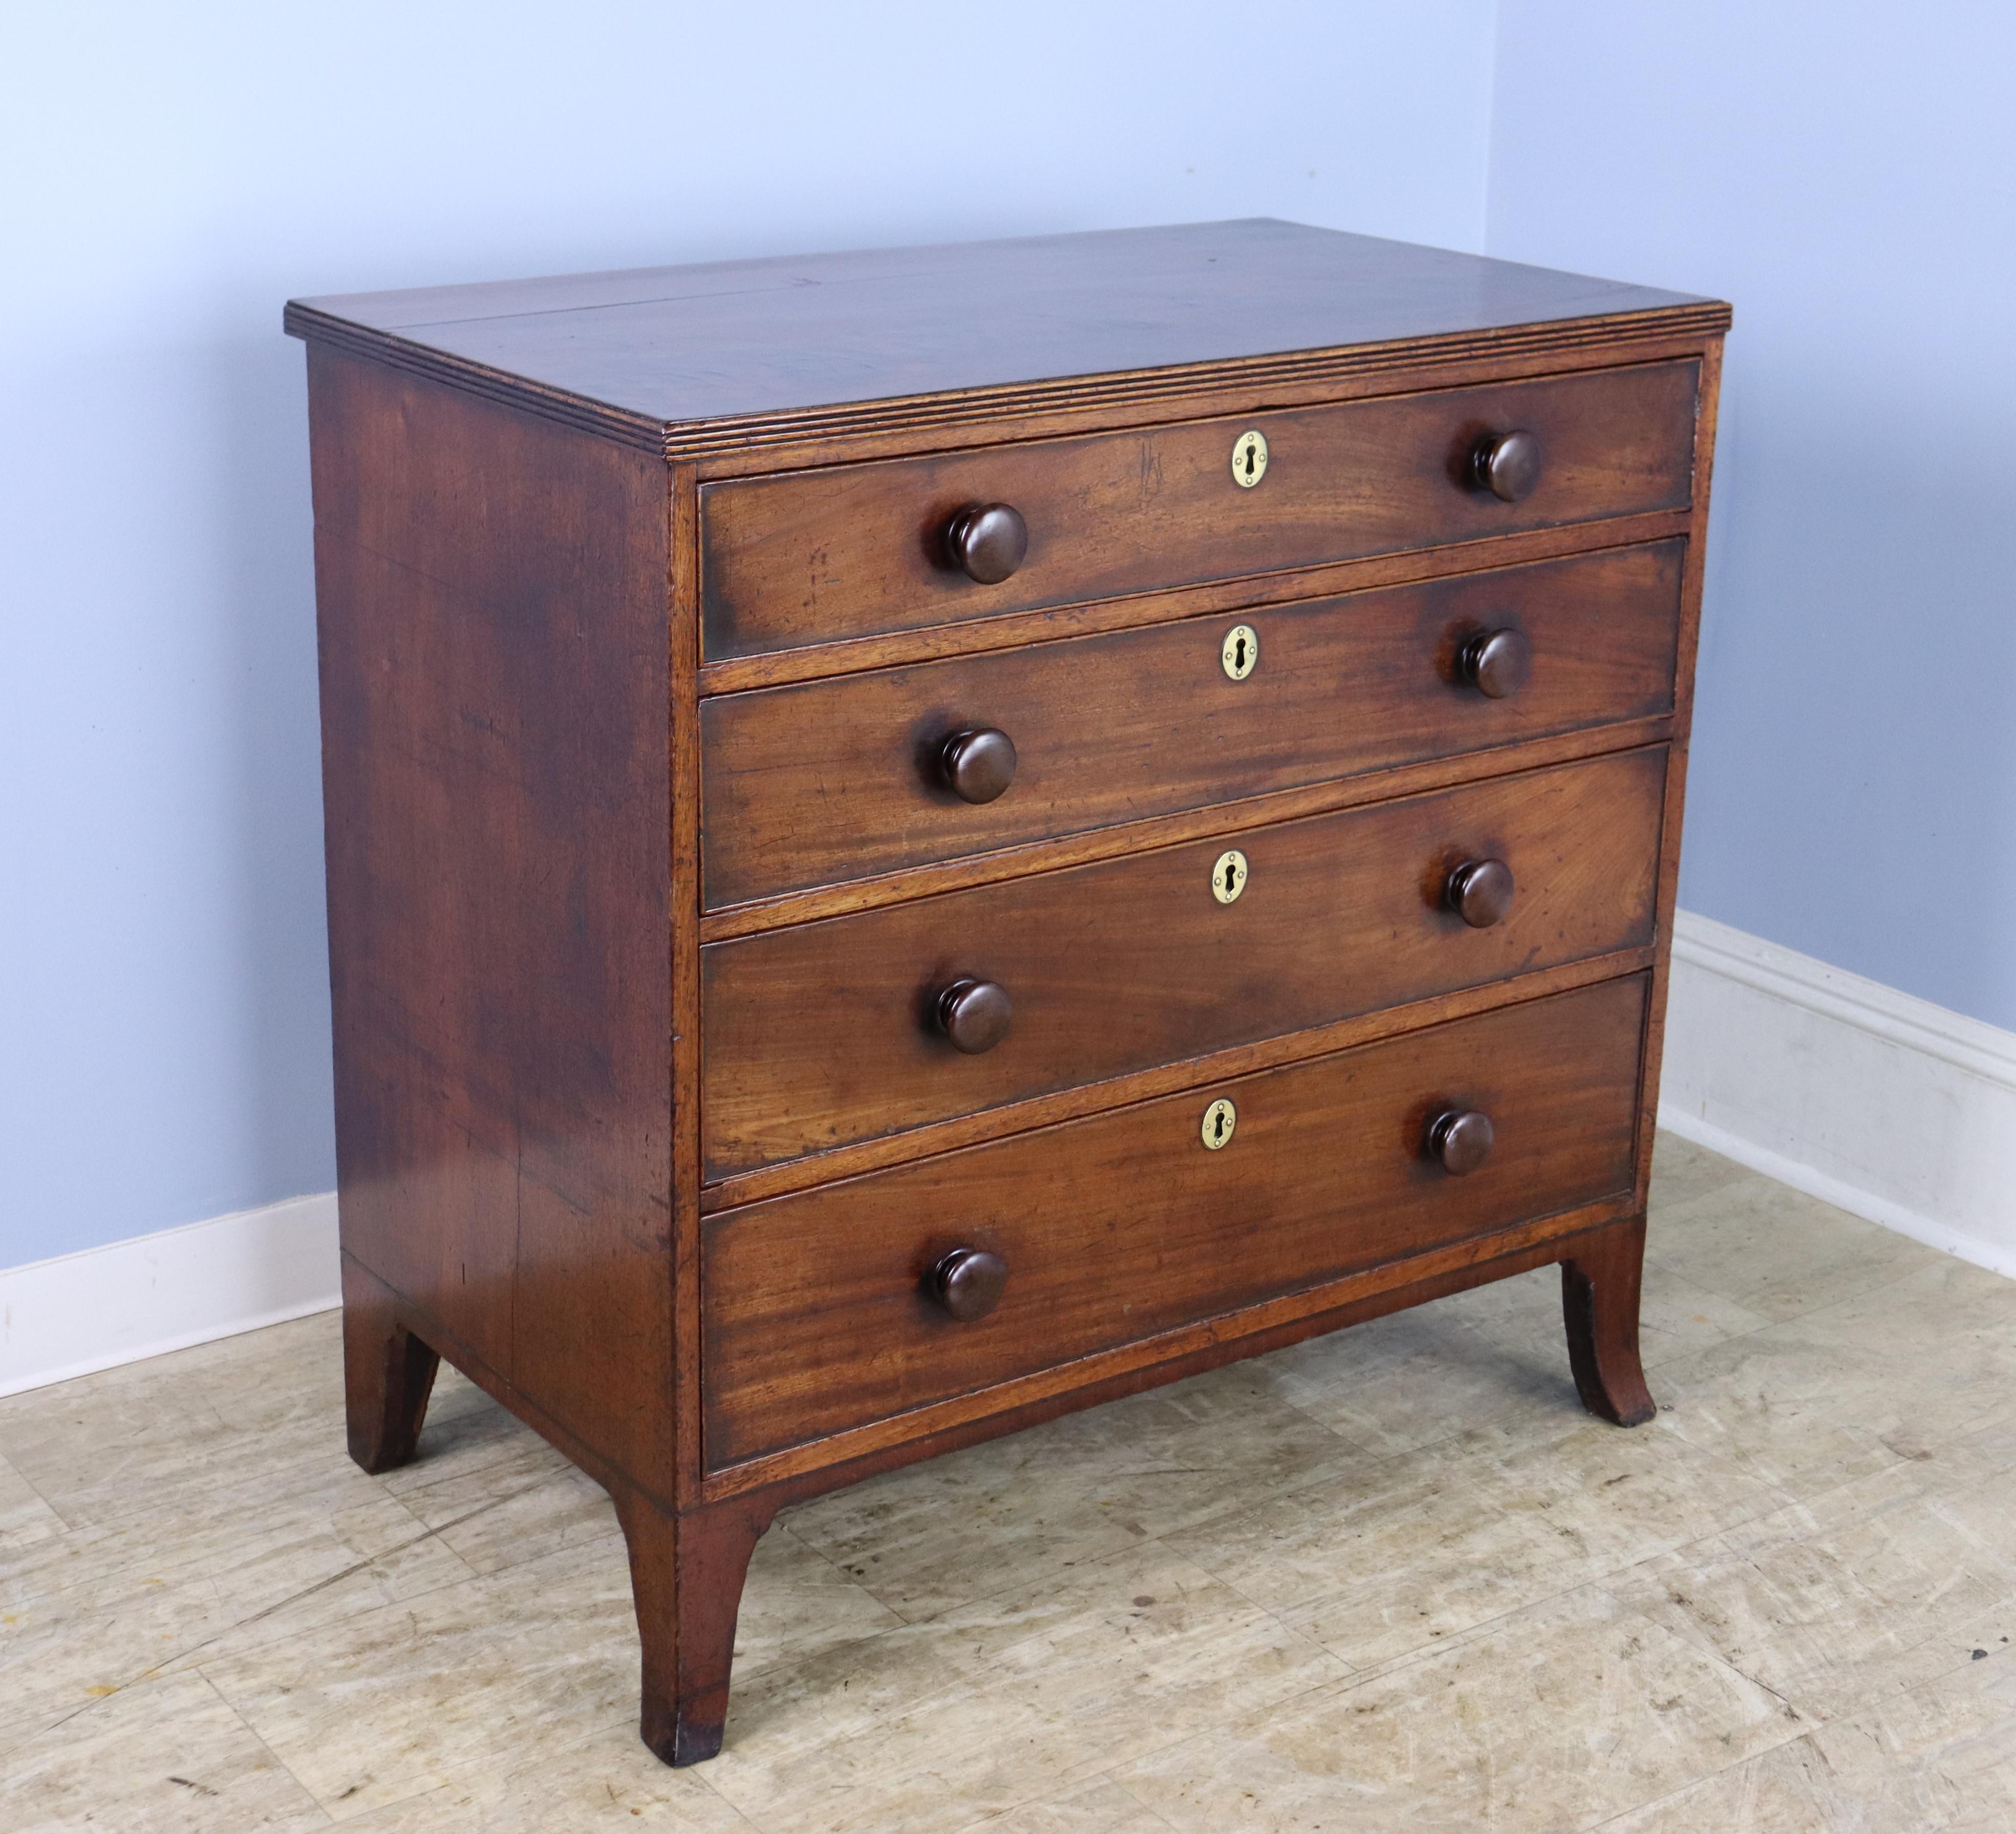 An elegant mahogany bureau in very good antique condition. The mahogany is a rich medium color with a lovely grain. Details of note include the decorative  reeded edge on the top, discreet cockbeading on the drawers, and beautifully wrought brass